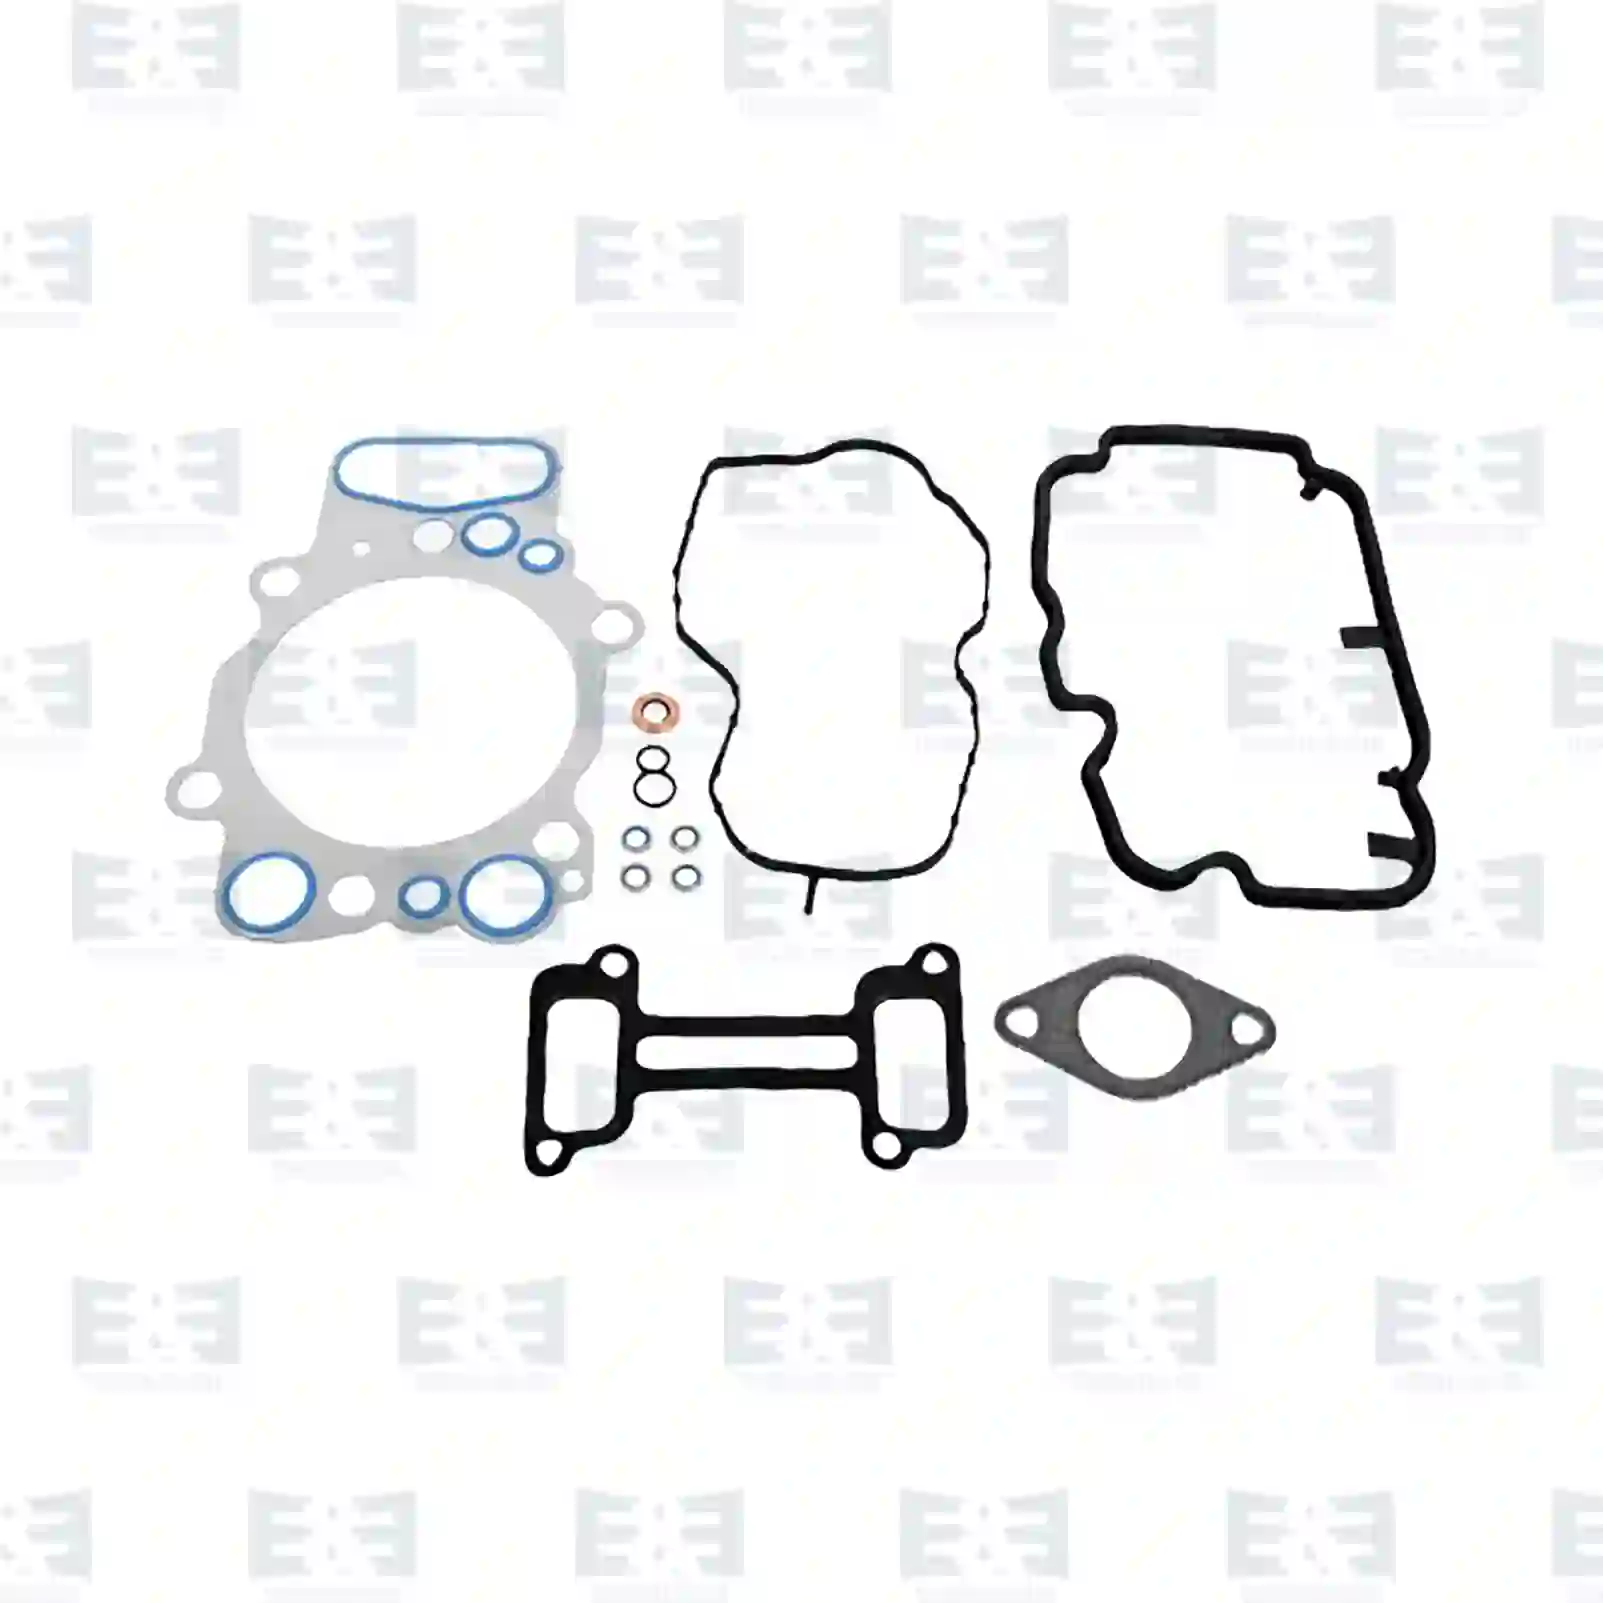  Cylinder head gasket kit || E&E Truck Spare Parts | Truck Spare Parts, Auotomotive Spare Parts